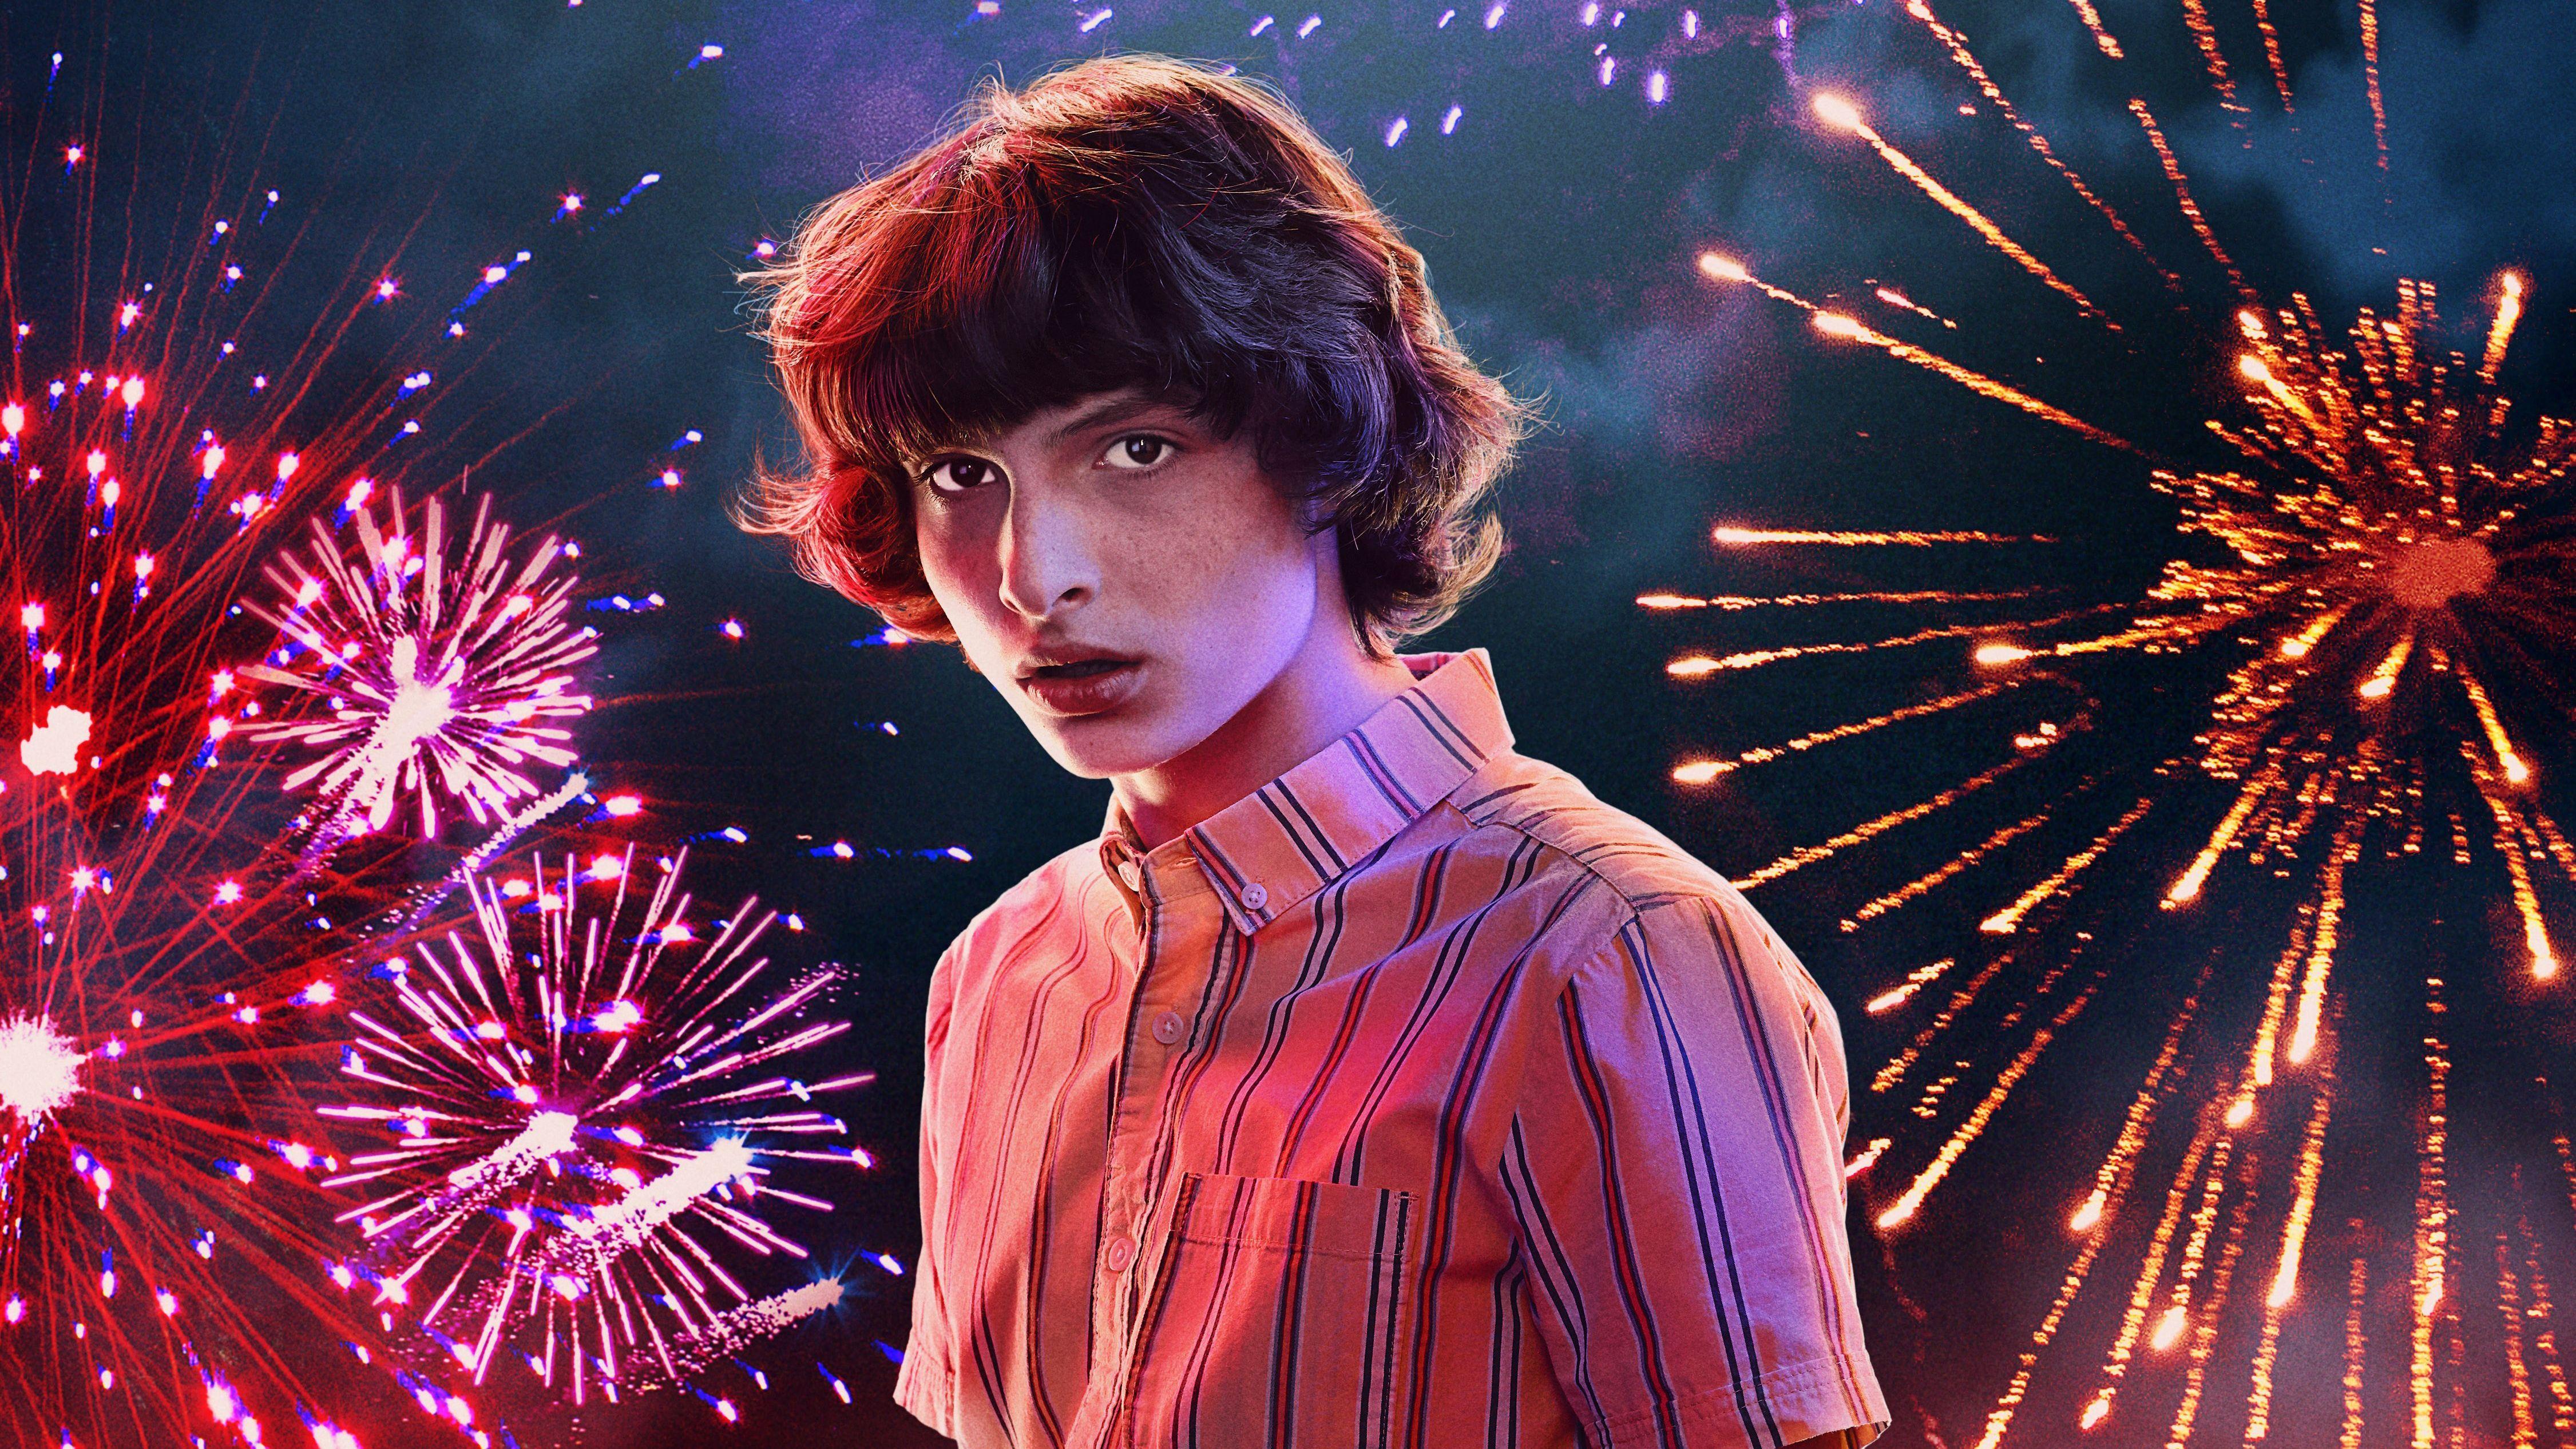 For a Stranger Things to honor your favorite show Stranger Things Girly HD  phone wallpaper  Pxfuel